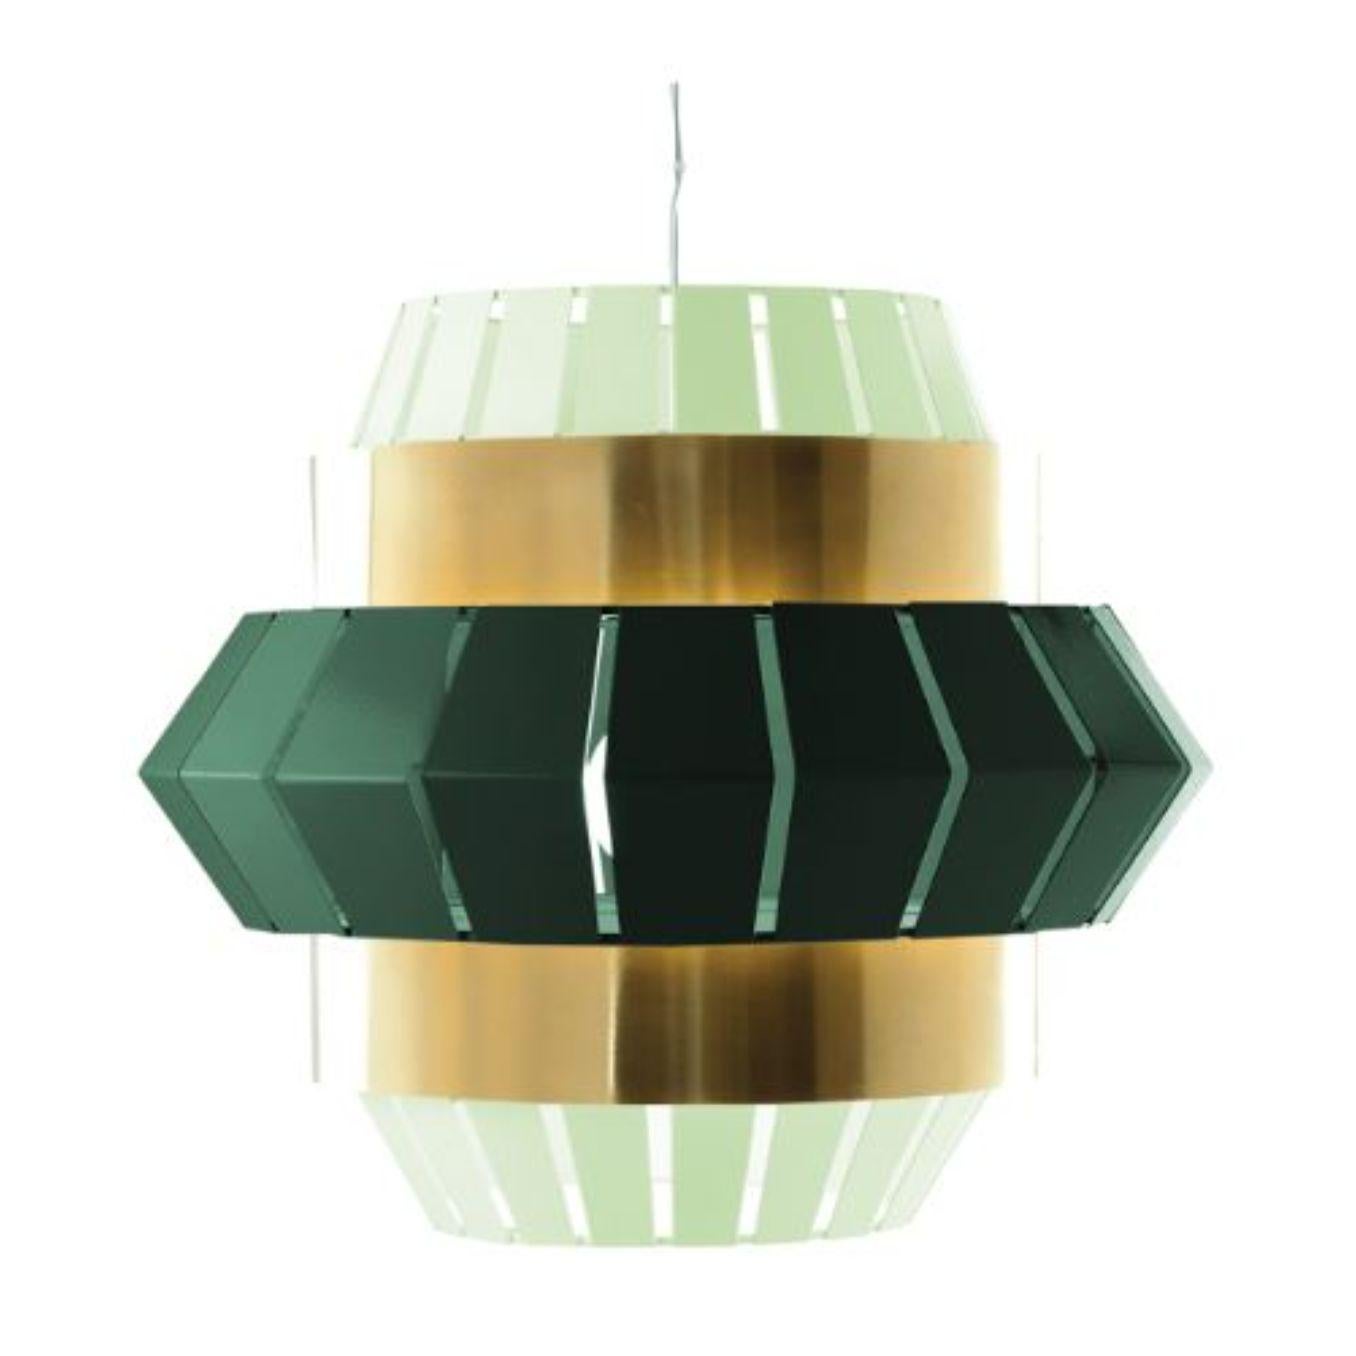 Dream and Moss Comb Suspension lamp with Brass Ring by Dooq
Dimensions: W 74 x D 74 x H 60 cm
Materials: lacquered metal, polished brass.
Also available in different colors and materials.

Information:
230V/50Hz
E27/1x20W LED
120V/60Hz
E26/1x15W